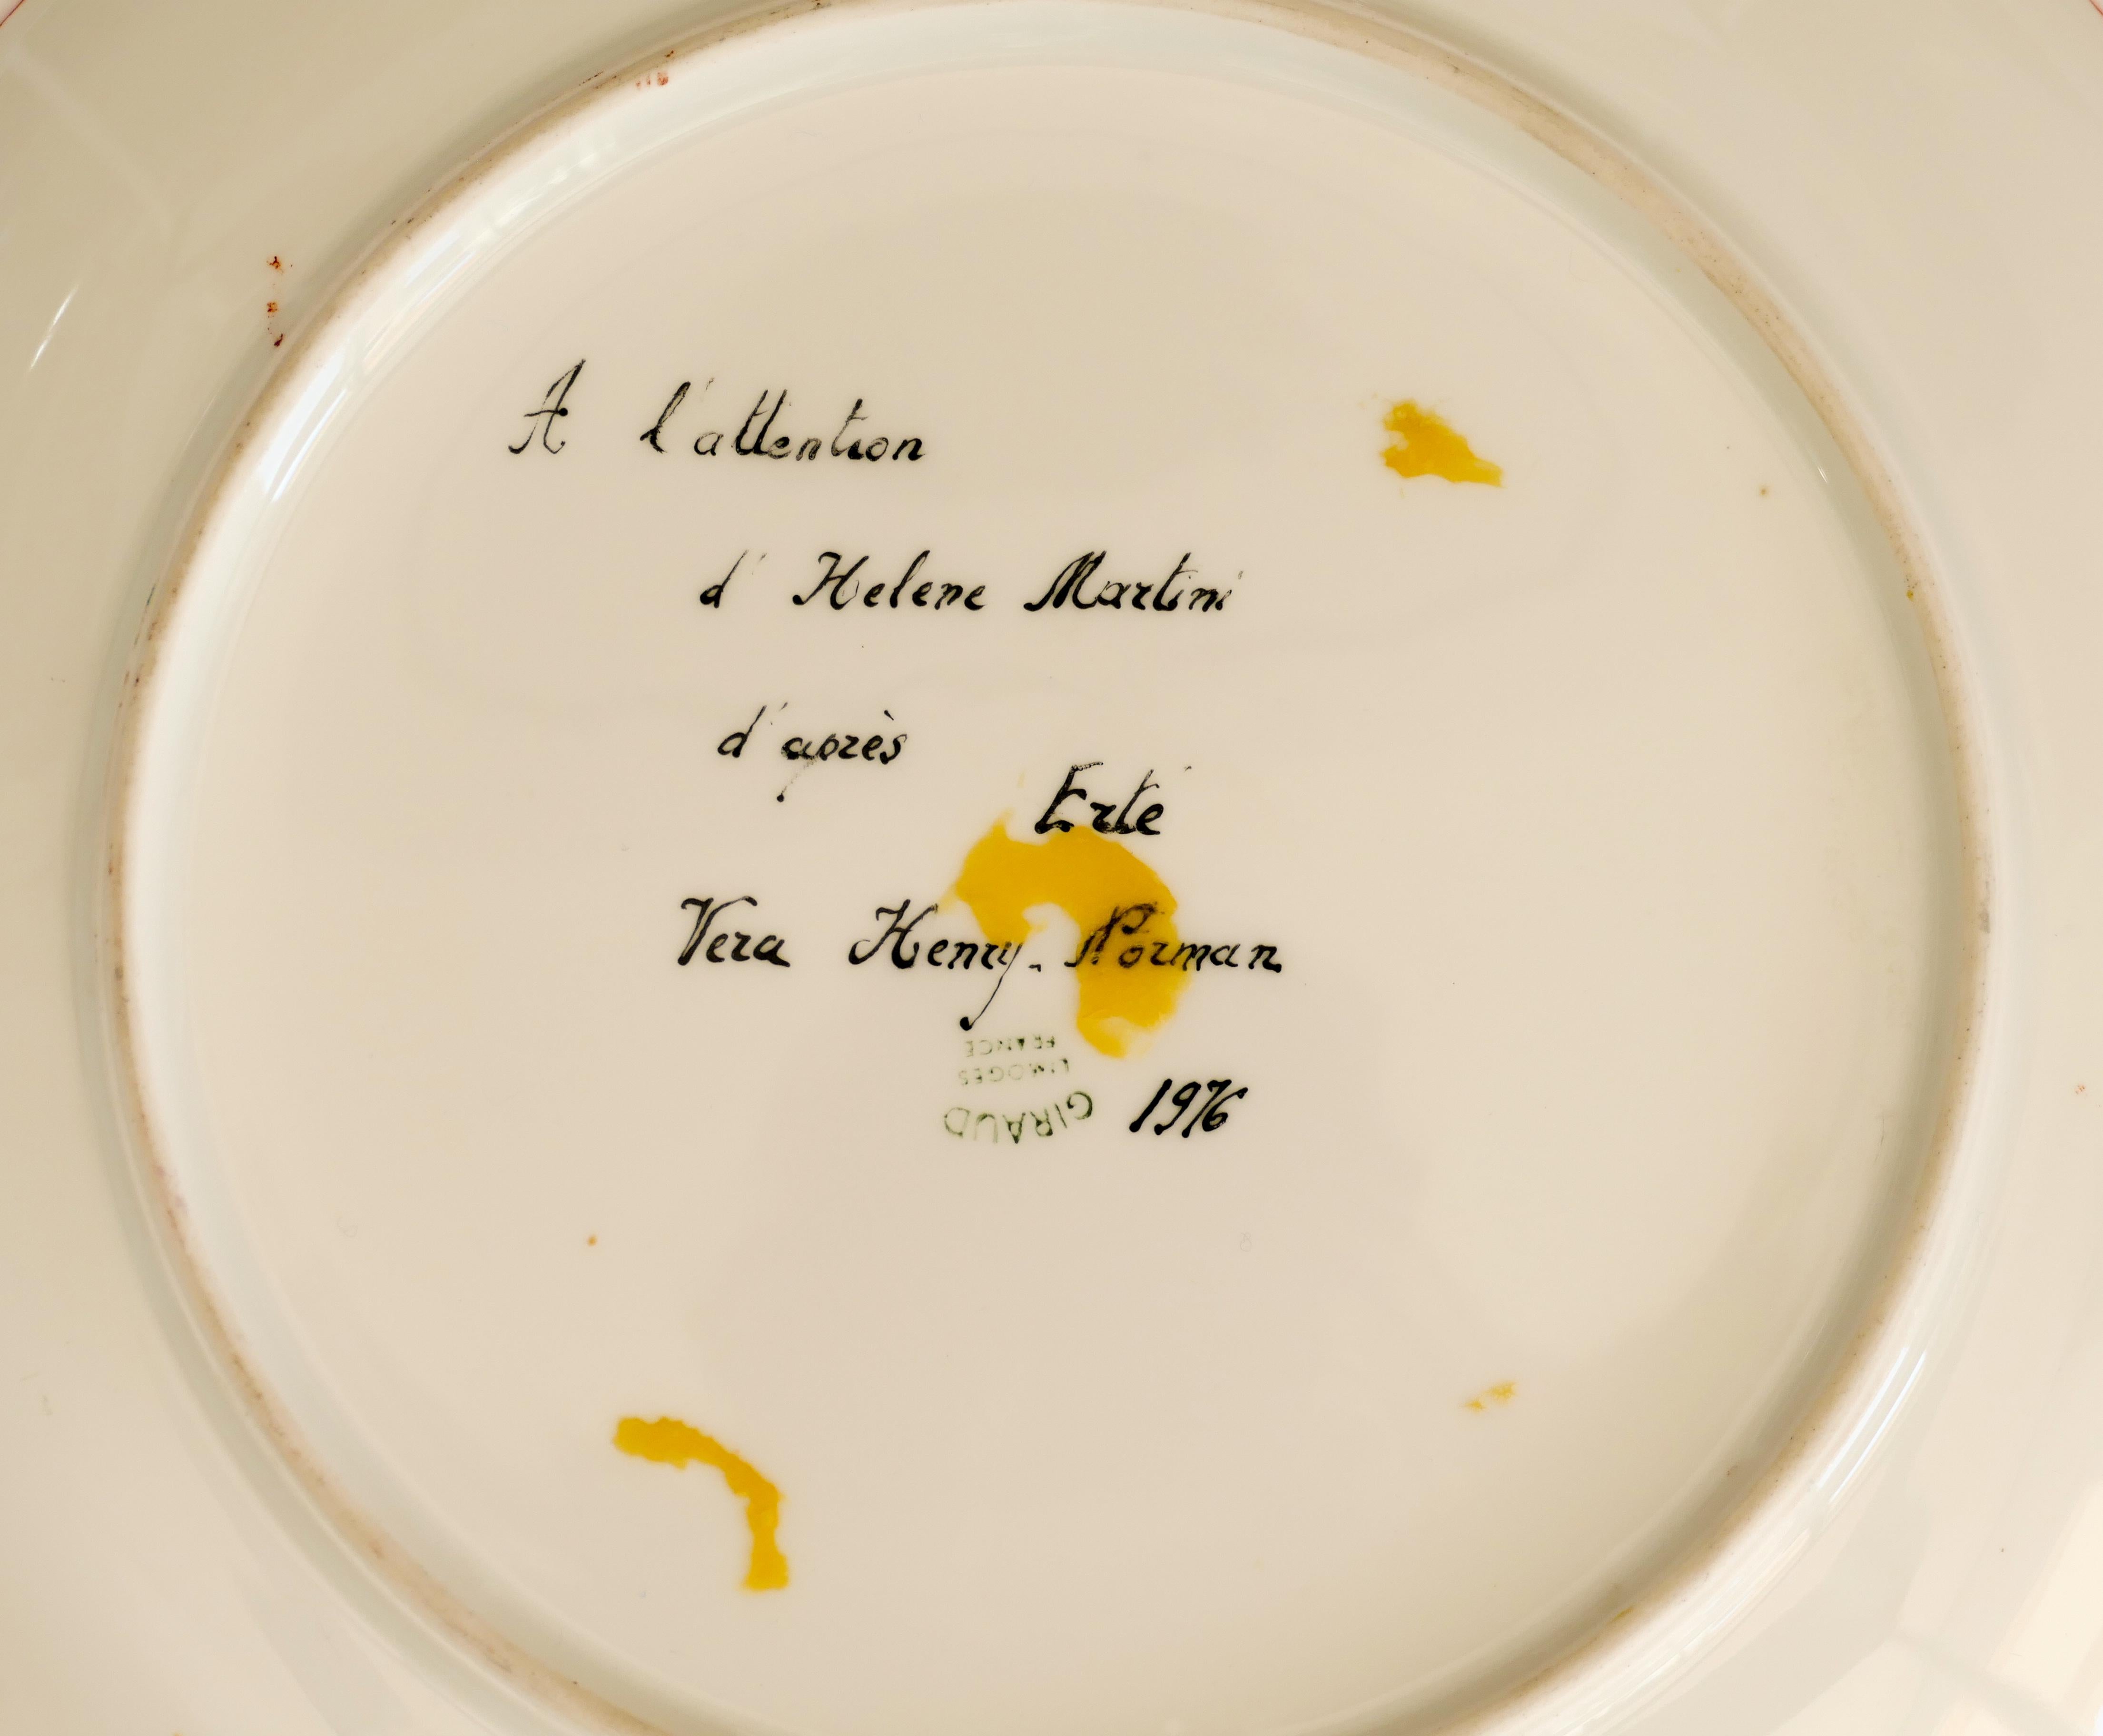 Á l'attention d'Hélène Martini Plate is an original decorative porcelain plate realized in 1976.

This very rare plate reproduces a sketch of a male portrait on a red background by Erté (Romain de Tirtoff) and on the back a signed and dated